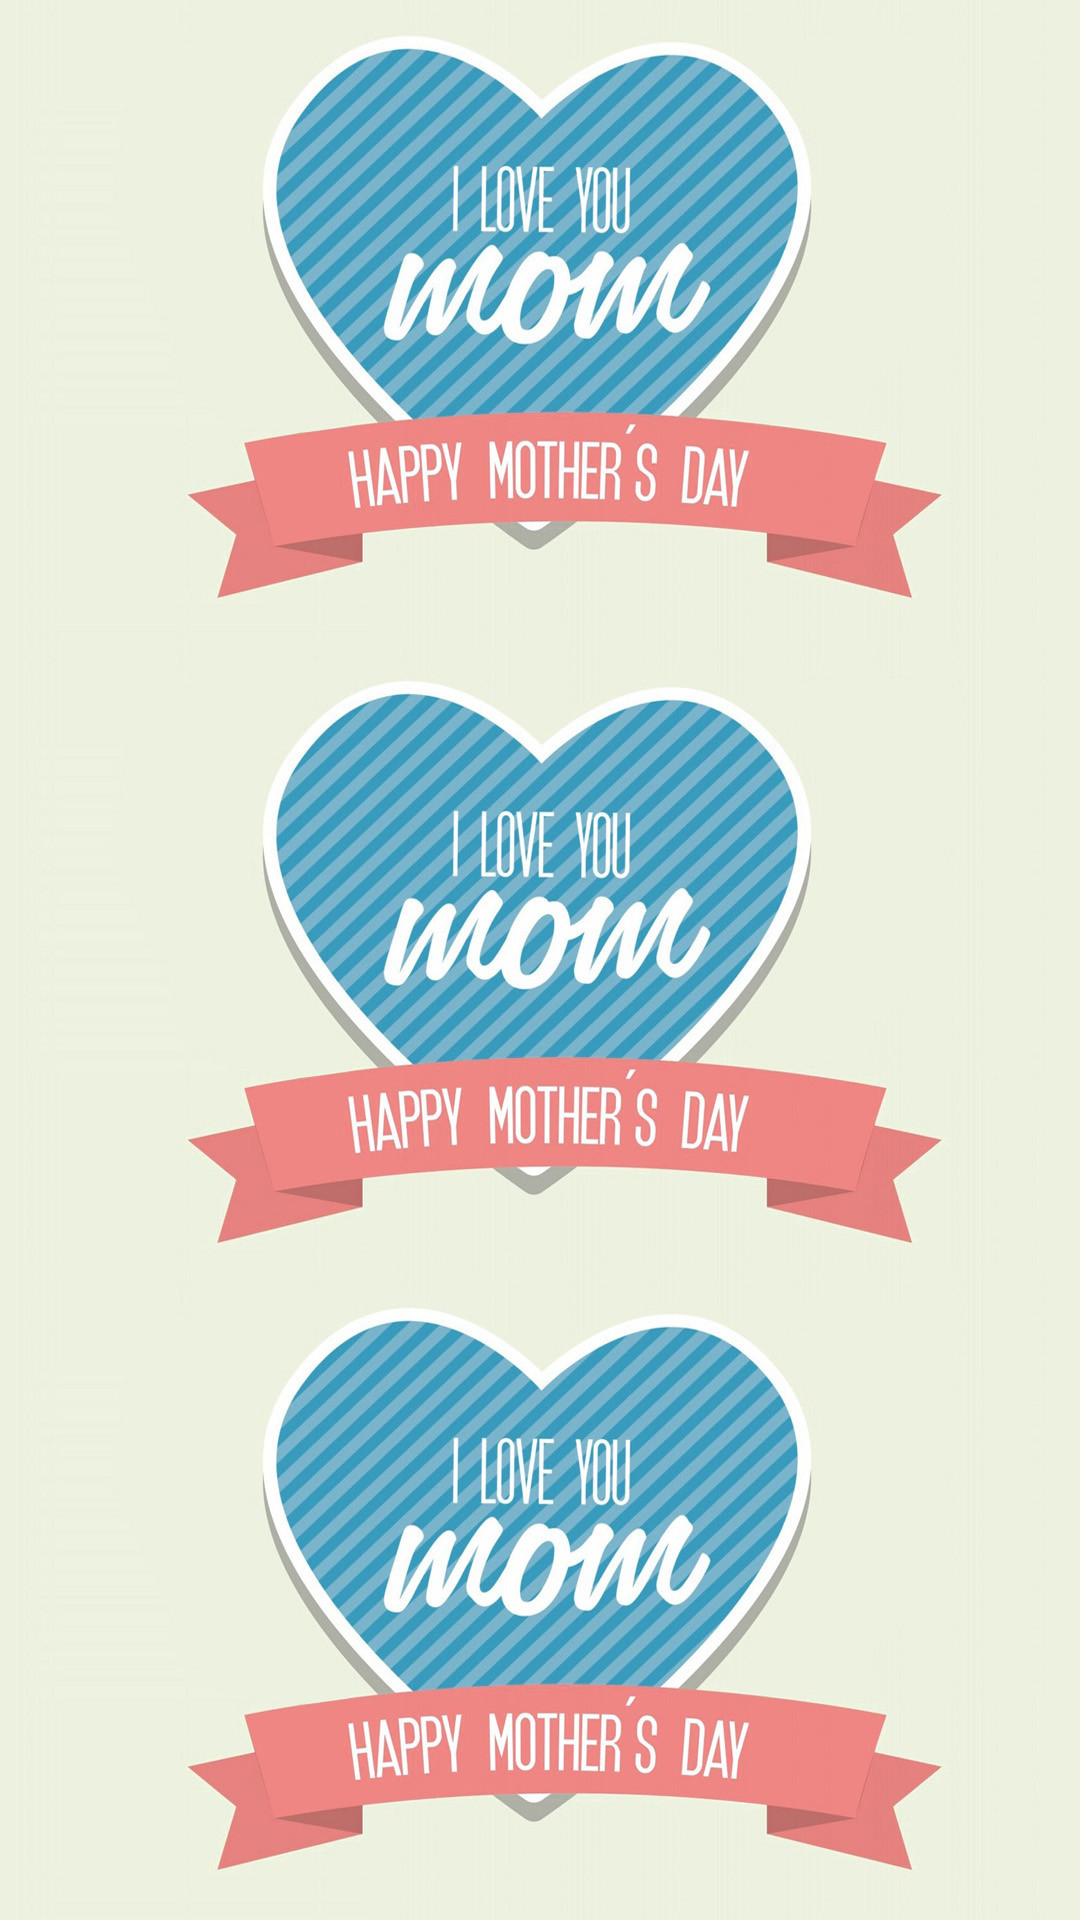 Love You Mom Pictures  Download Free Images on Unsplash